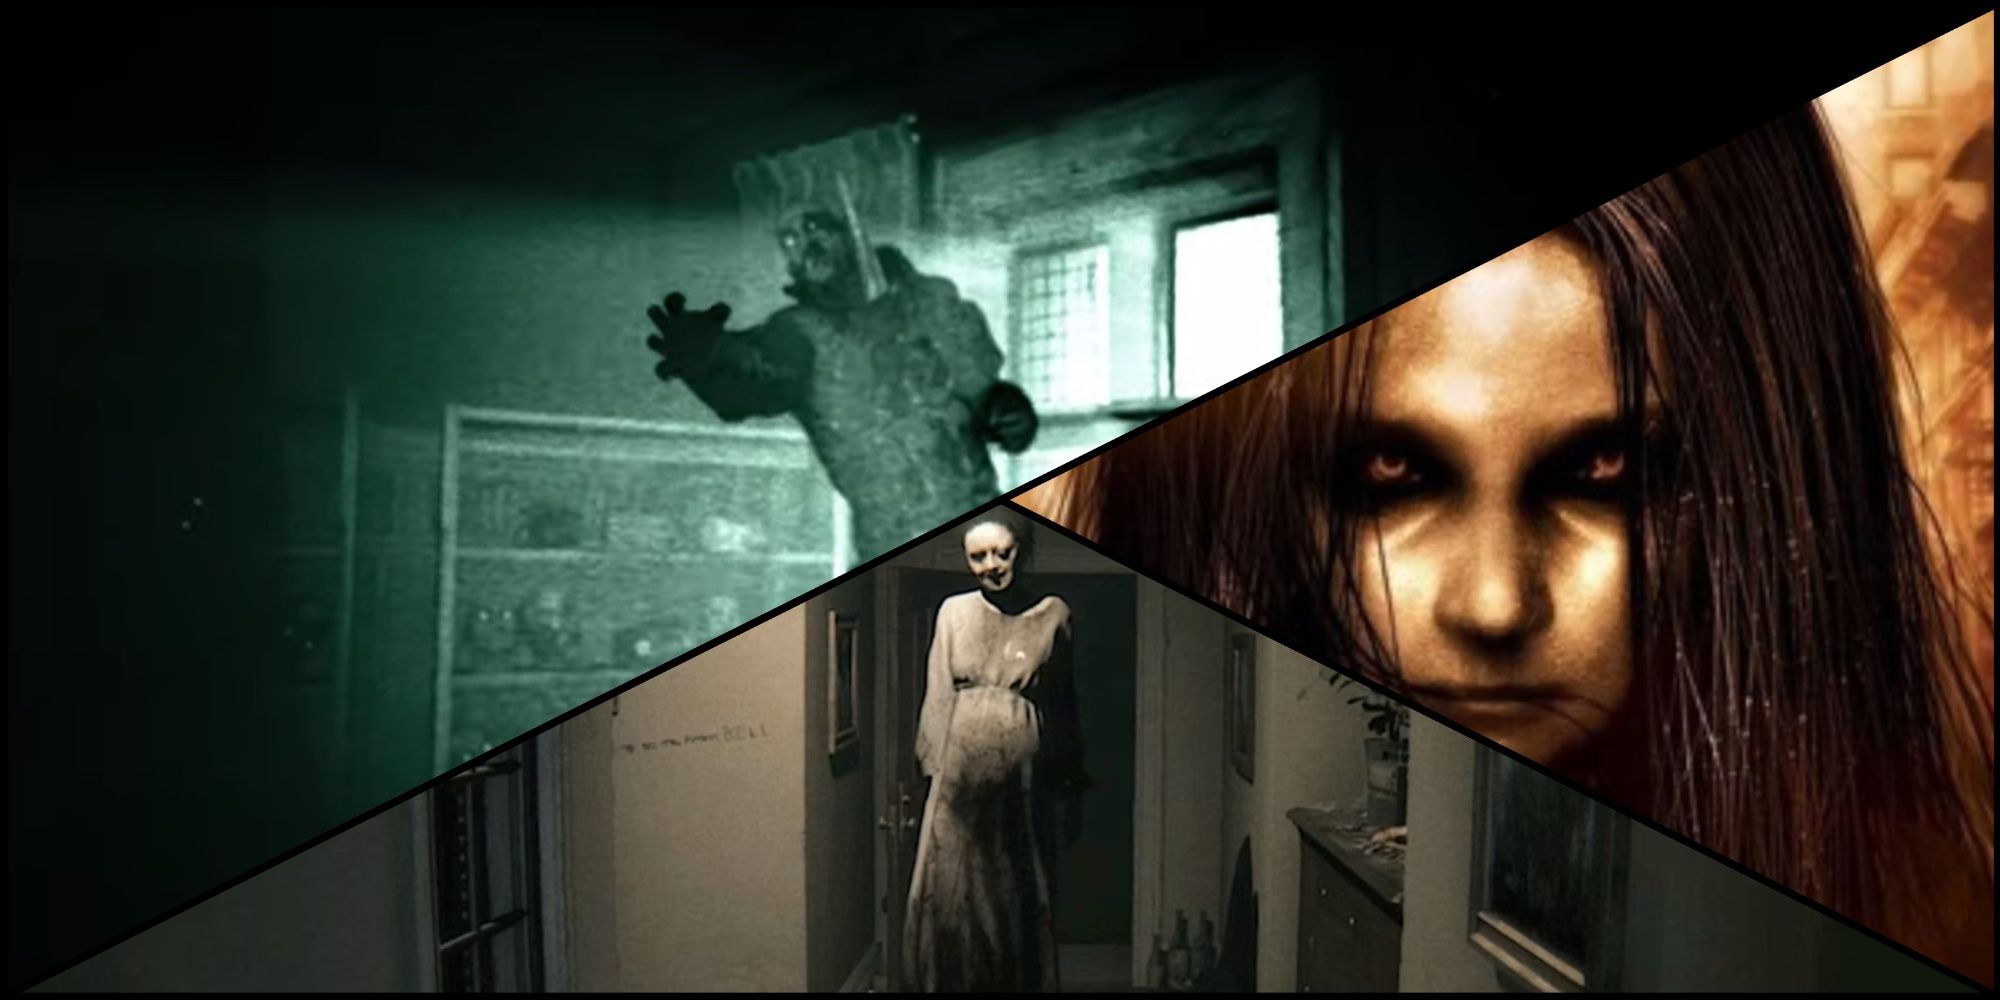 A split image of an impaled man in Outlast, Alma Wade in FEAR, and Lisa in PT